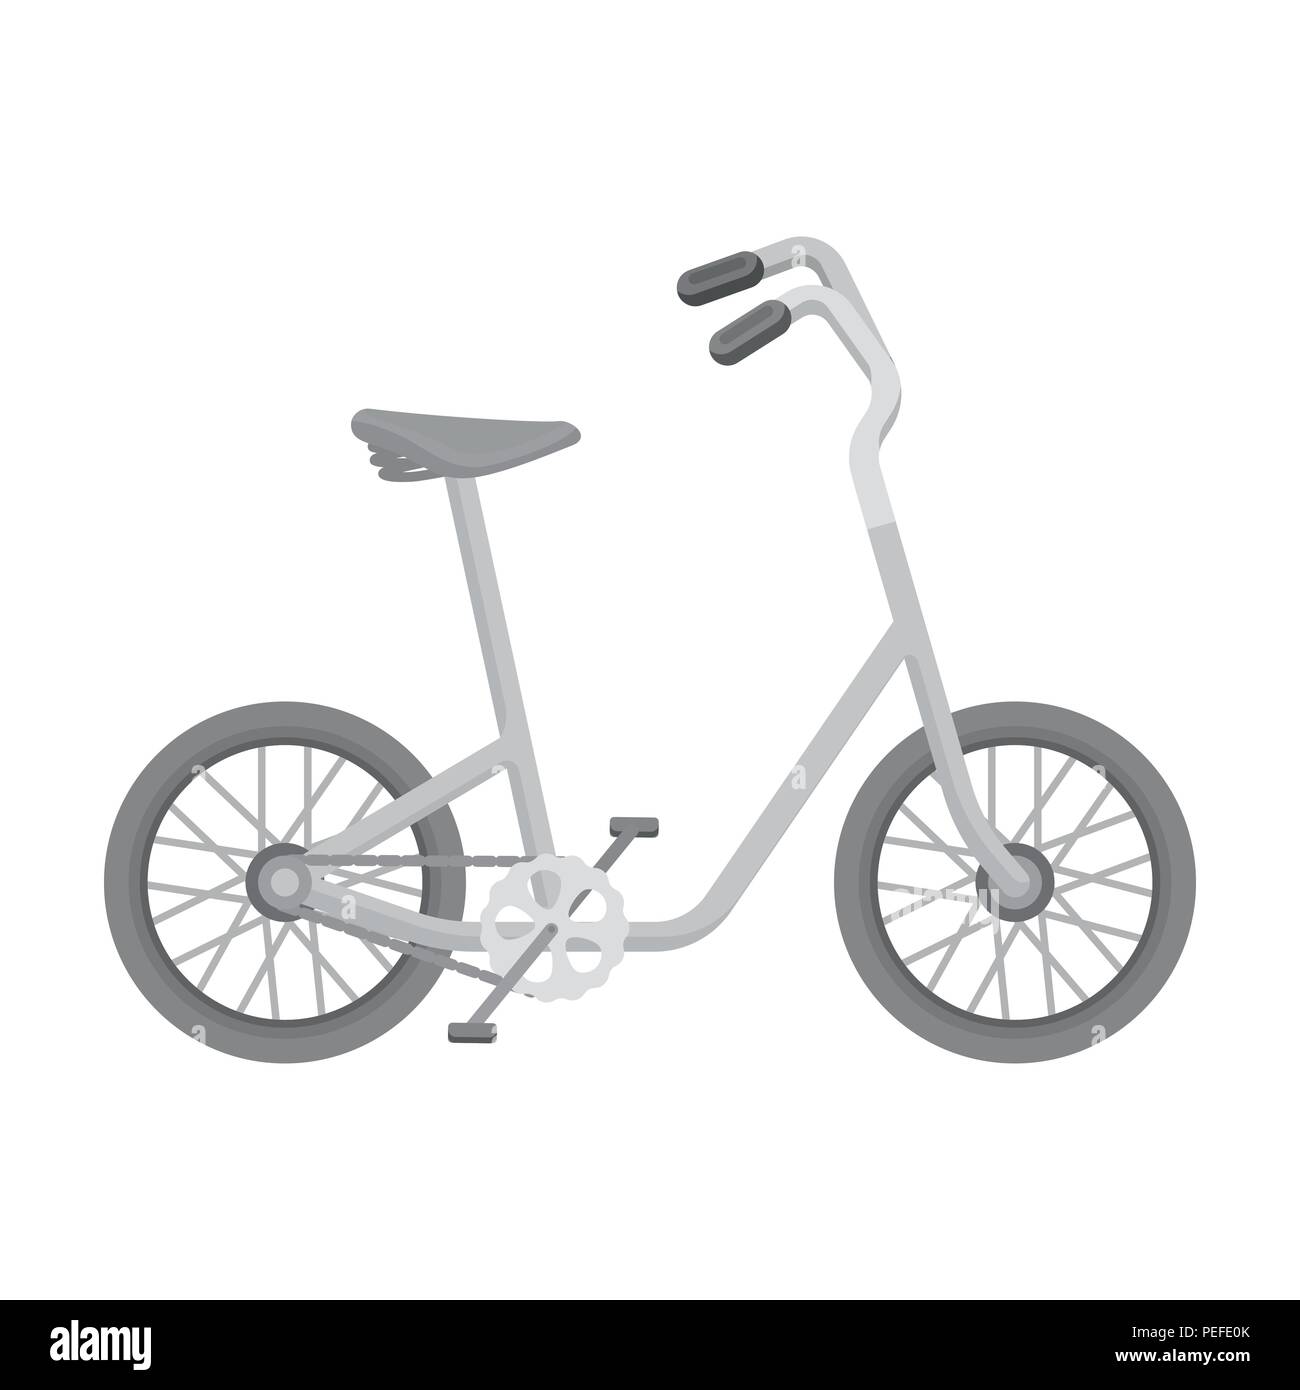 activity,bicycle,bicycles,bike,biking,child,children,color,competition,cute, cycle,design,fun ,graphic,healthy,icon,illustration,isolated,kid,leisure,lifestyle,little,logo,monochrome,object,ride,sign, sport,symbol,transport,transportation,travel,vector ...